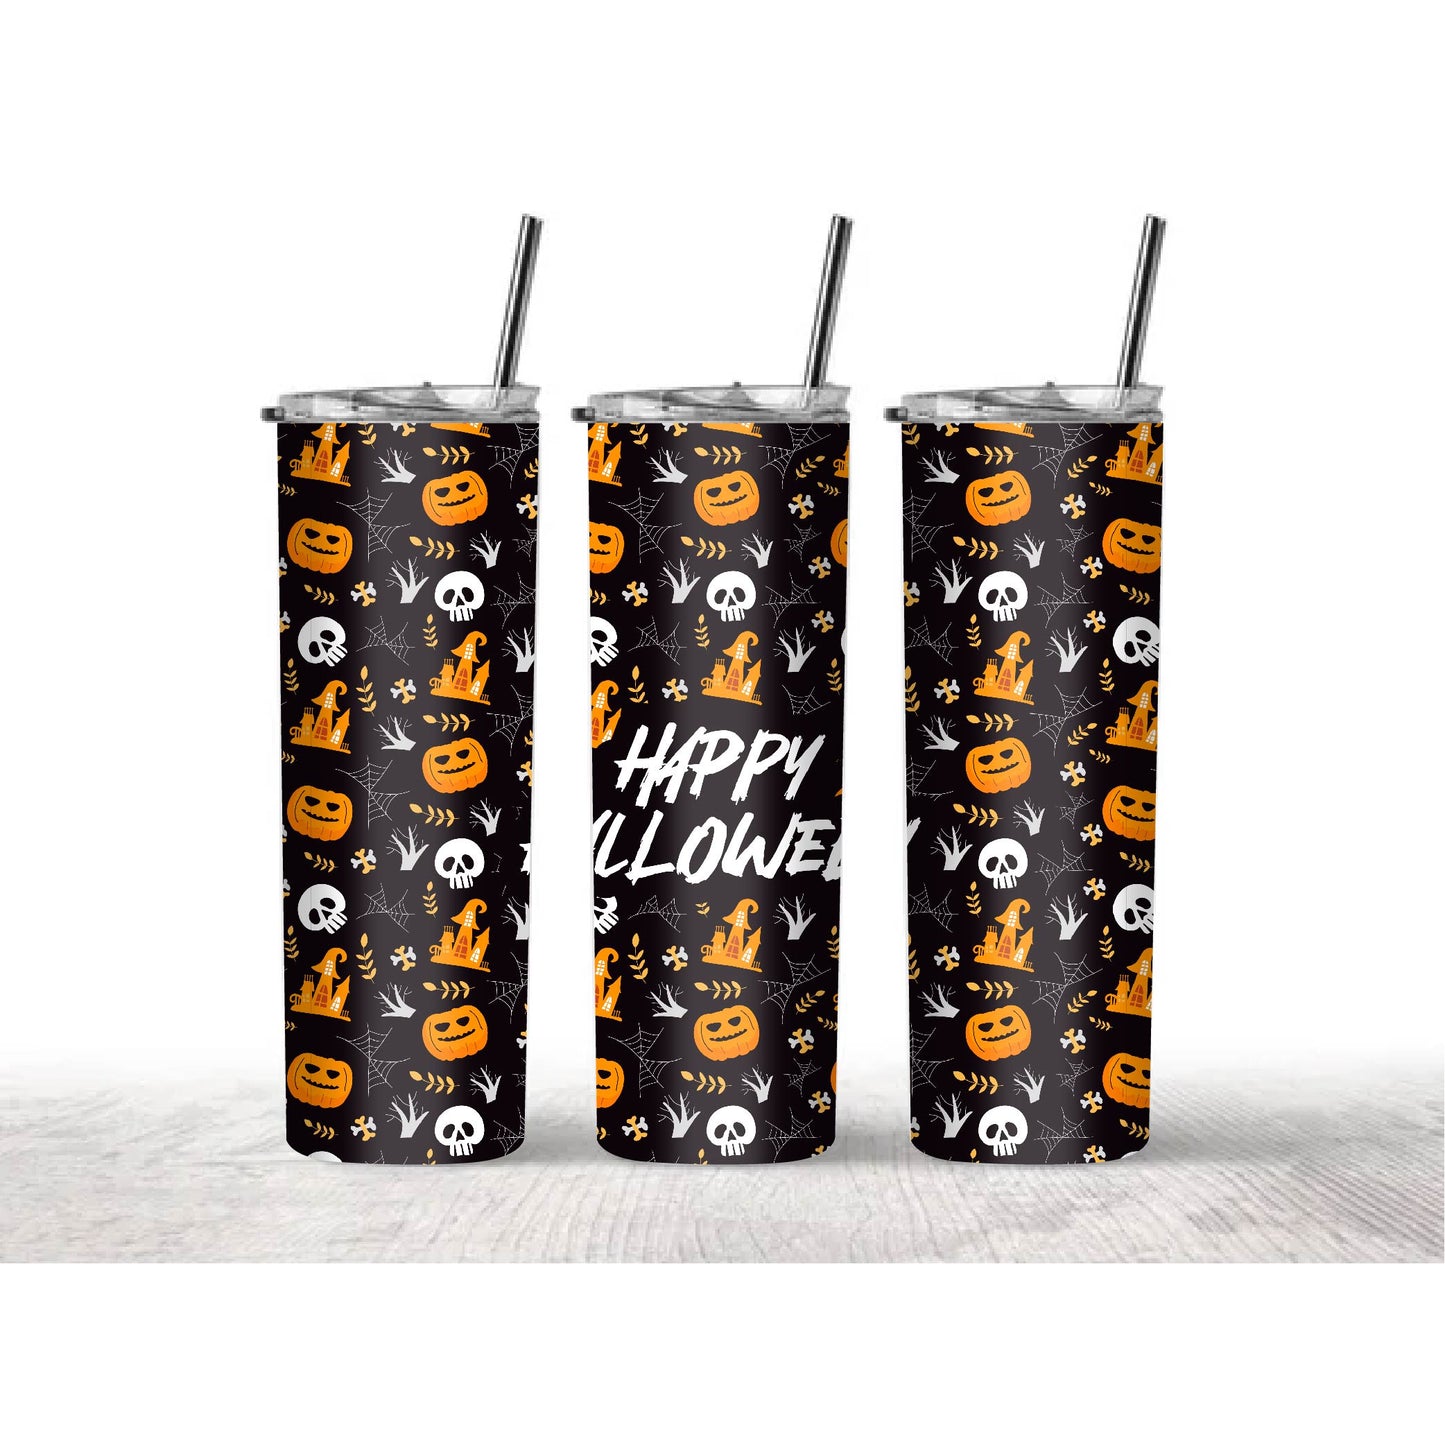 Halloween wrap only PNG, Happy Halloween PNG, spooky PNG, murcielagos PNG, ghosts PNG, halloween free